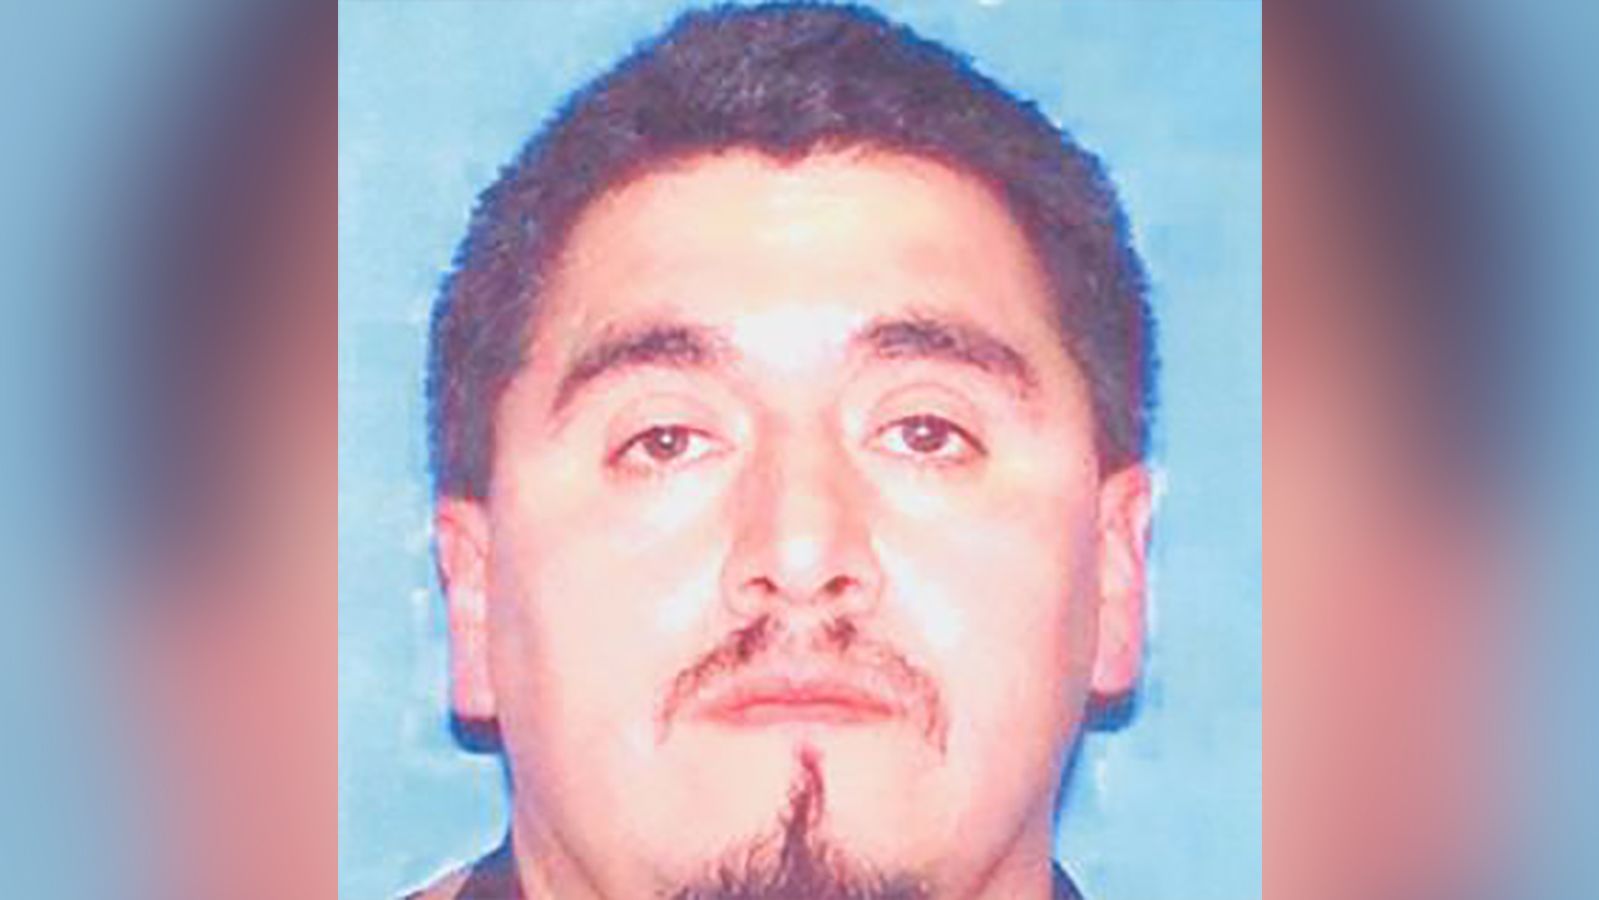 Octaviano Juarez-Corro was apprehended on February 3, 2022, in Mexico. He was wanted in connection with a 2006 shooting in a Milwaukee, Wisconsin, park.